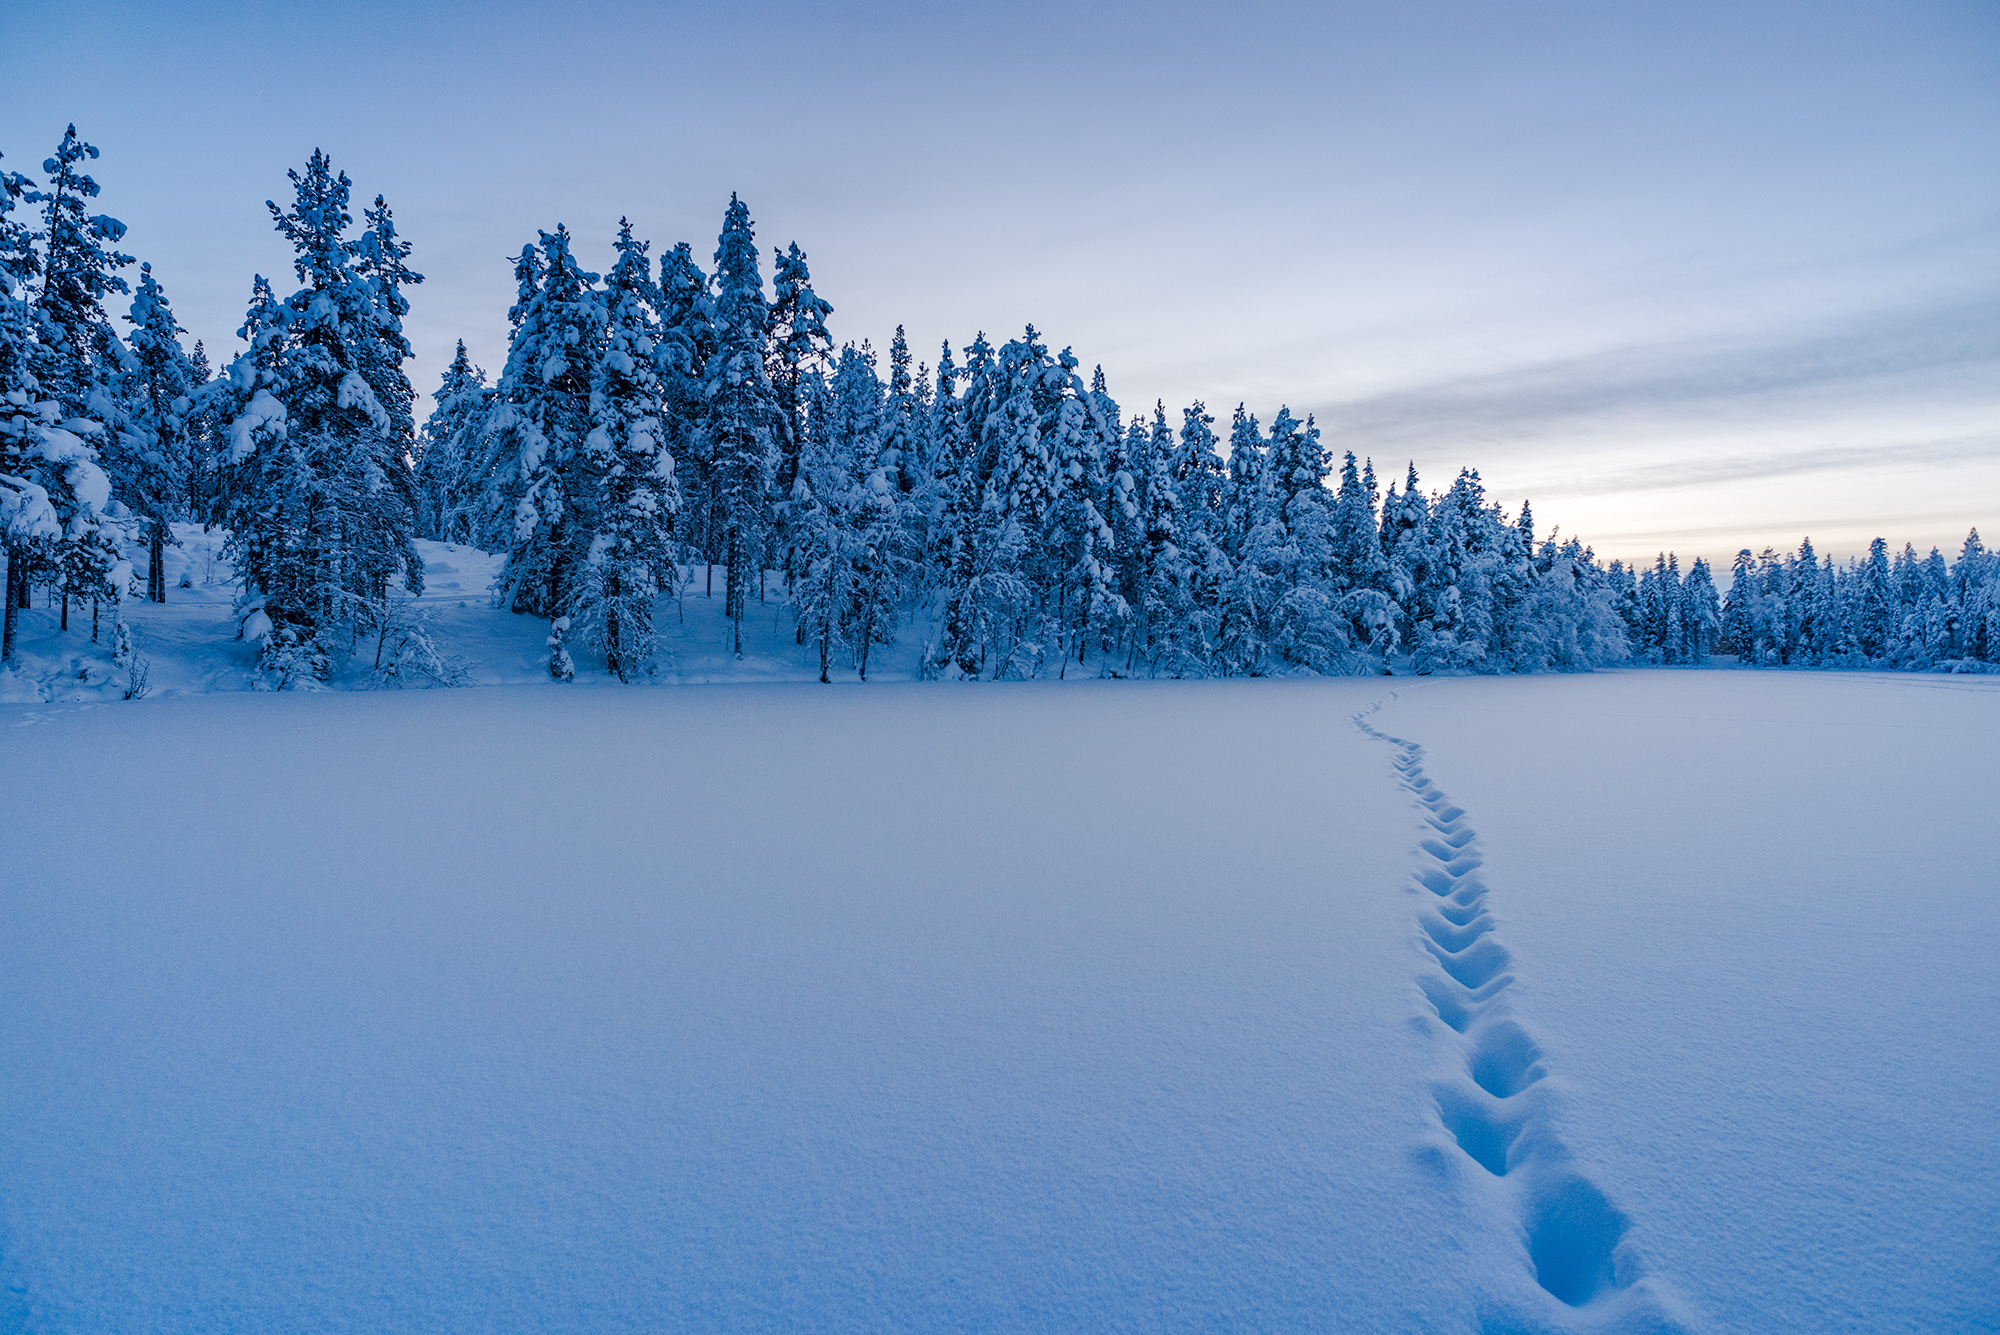 Animal tracks in the snow in Lapland.